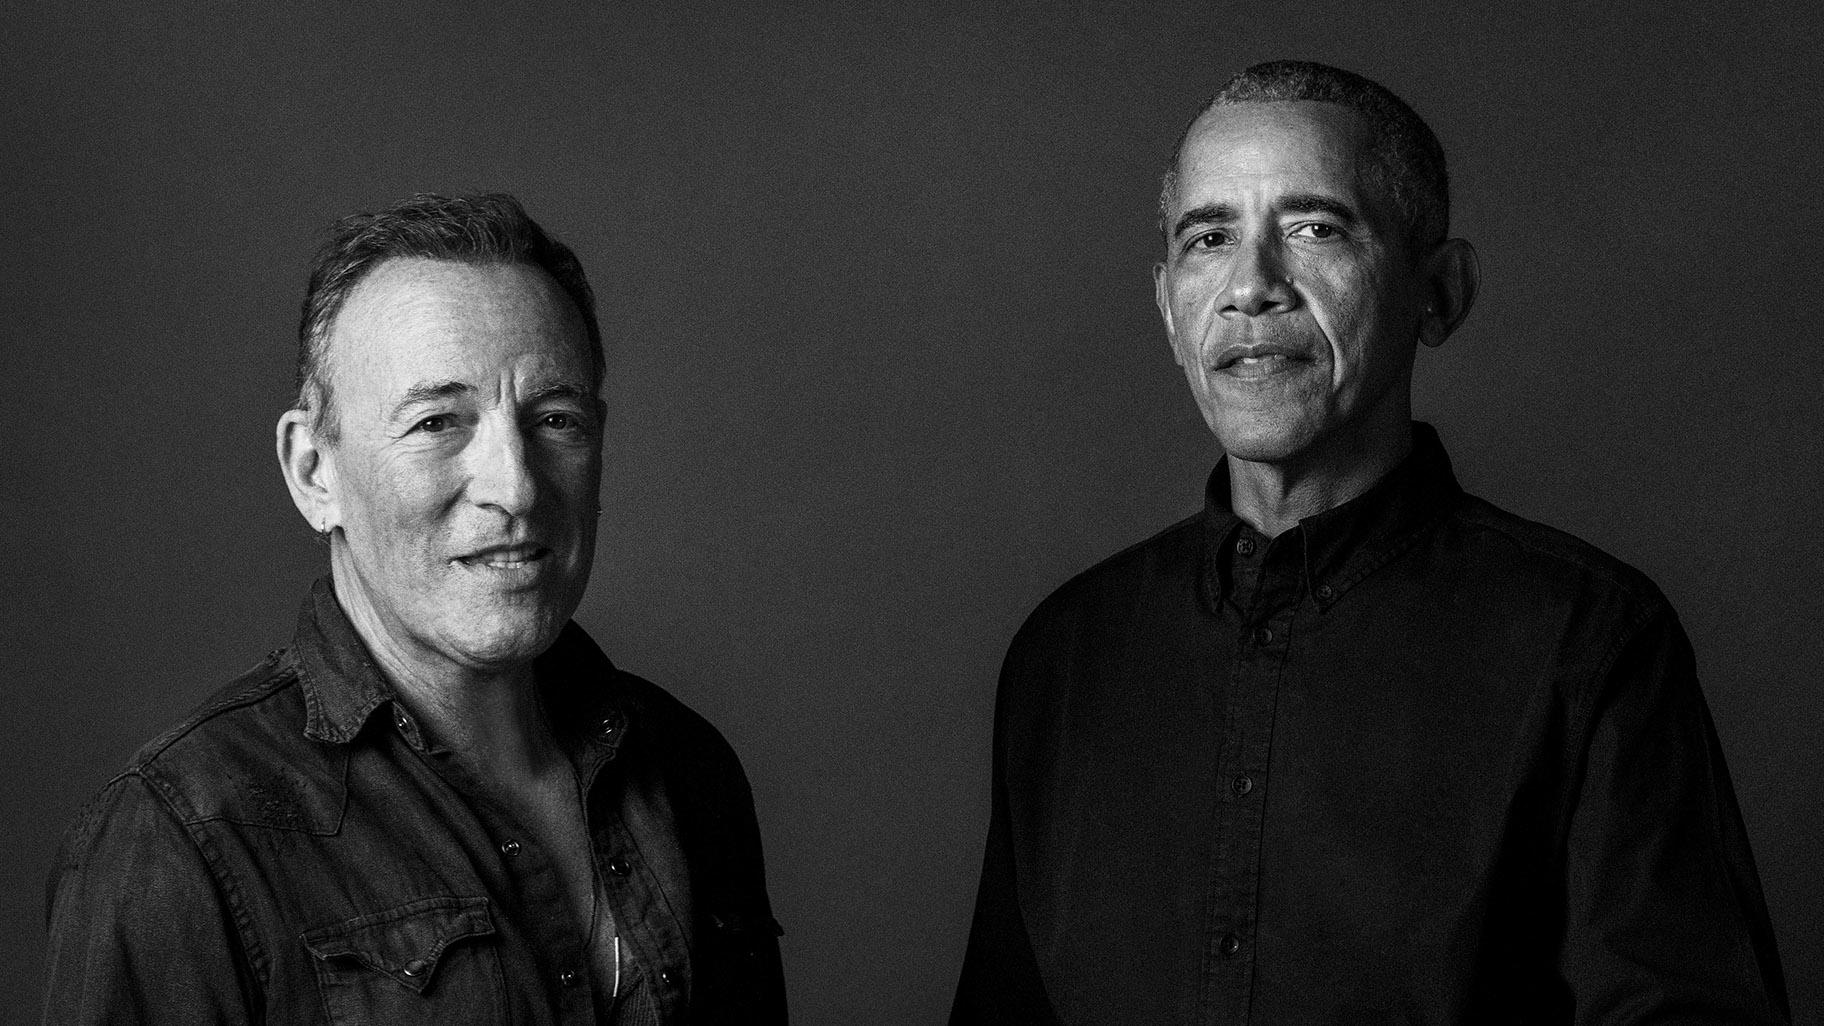 In this image provided by Rob DeMartin, former President Barack Obama and musician Bruce Springsteen pose for a photo. (Rob DeMartin via AP)